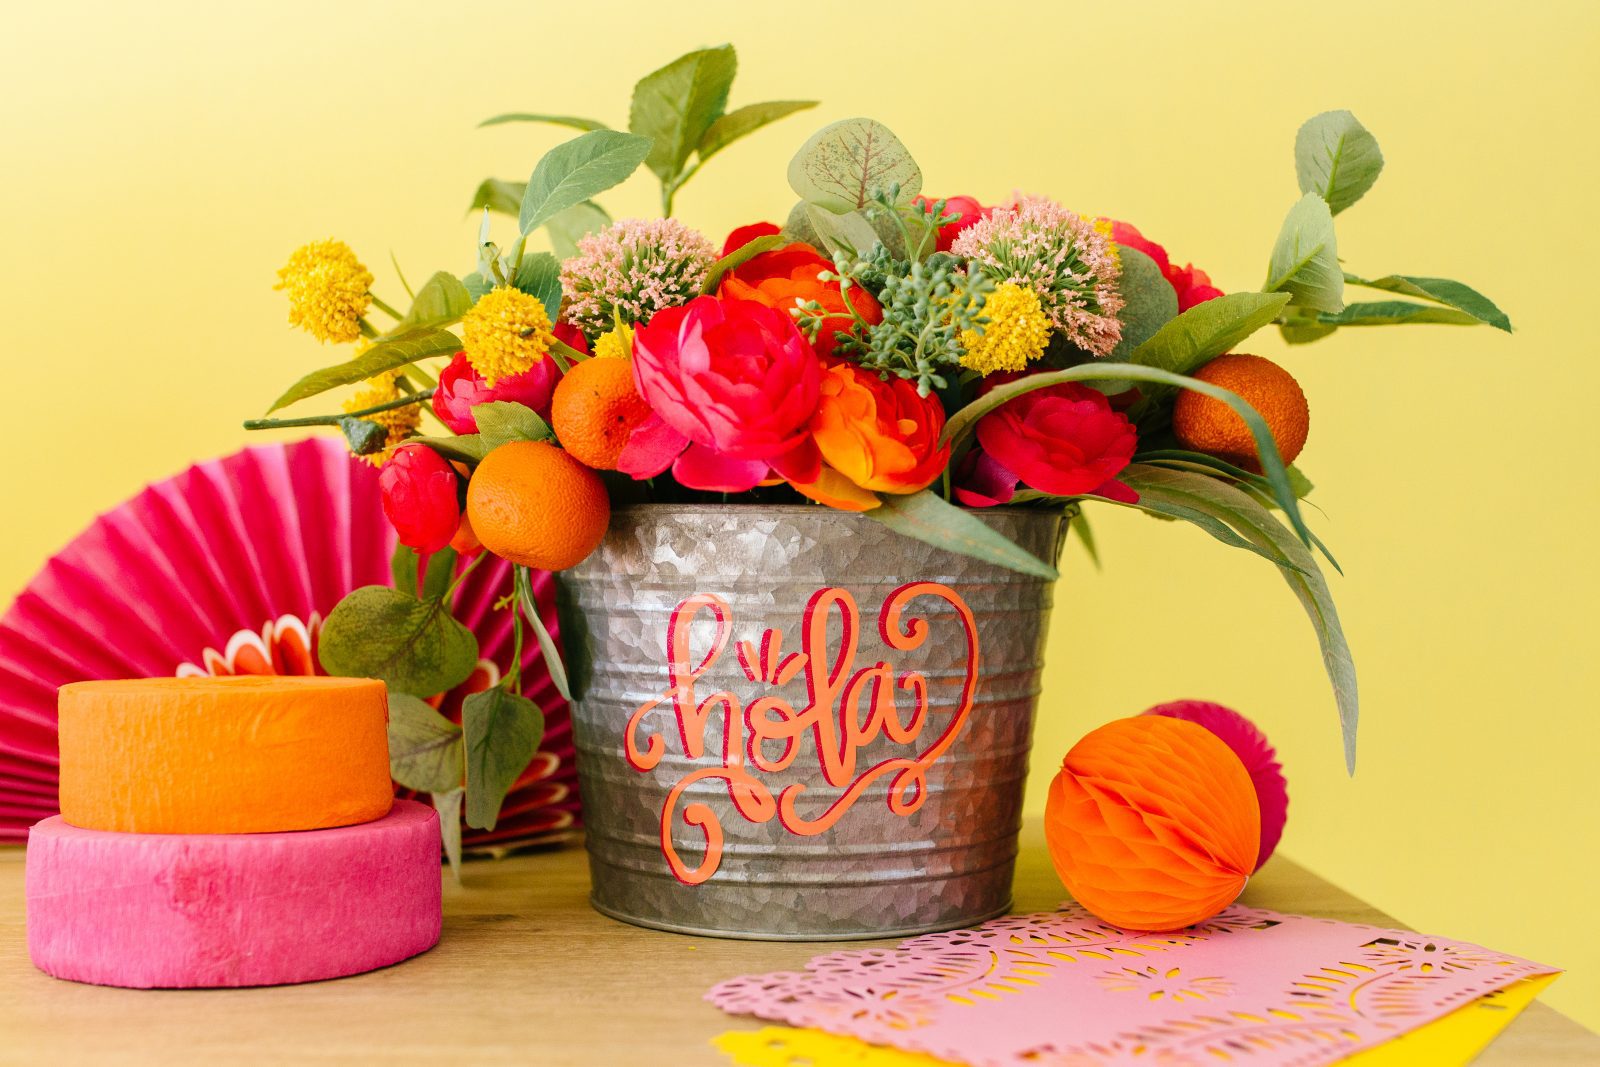 DIY Cinco de Mayo Table Centerpiece + a tutorial featured by Top US Craft Blog + The Pretty Life Girls